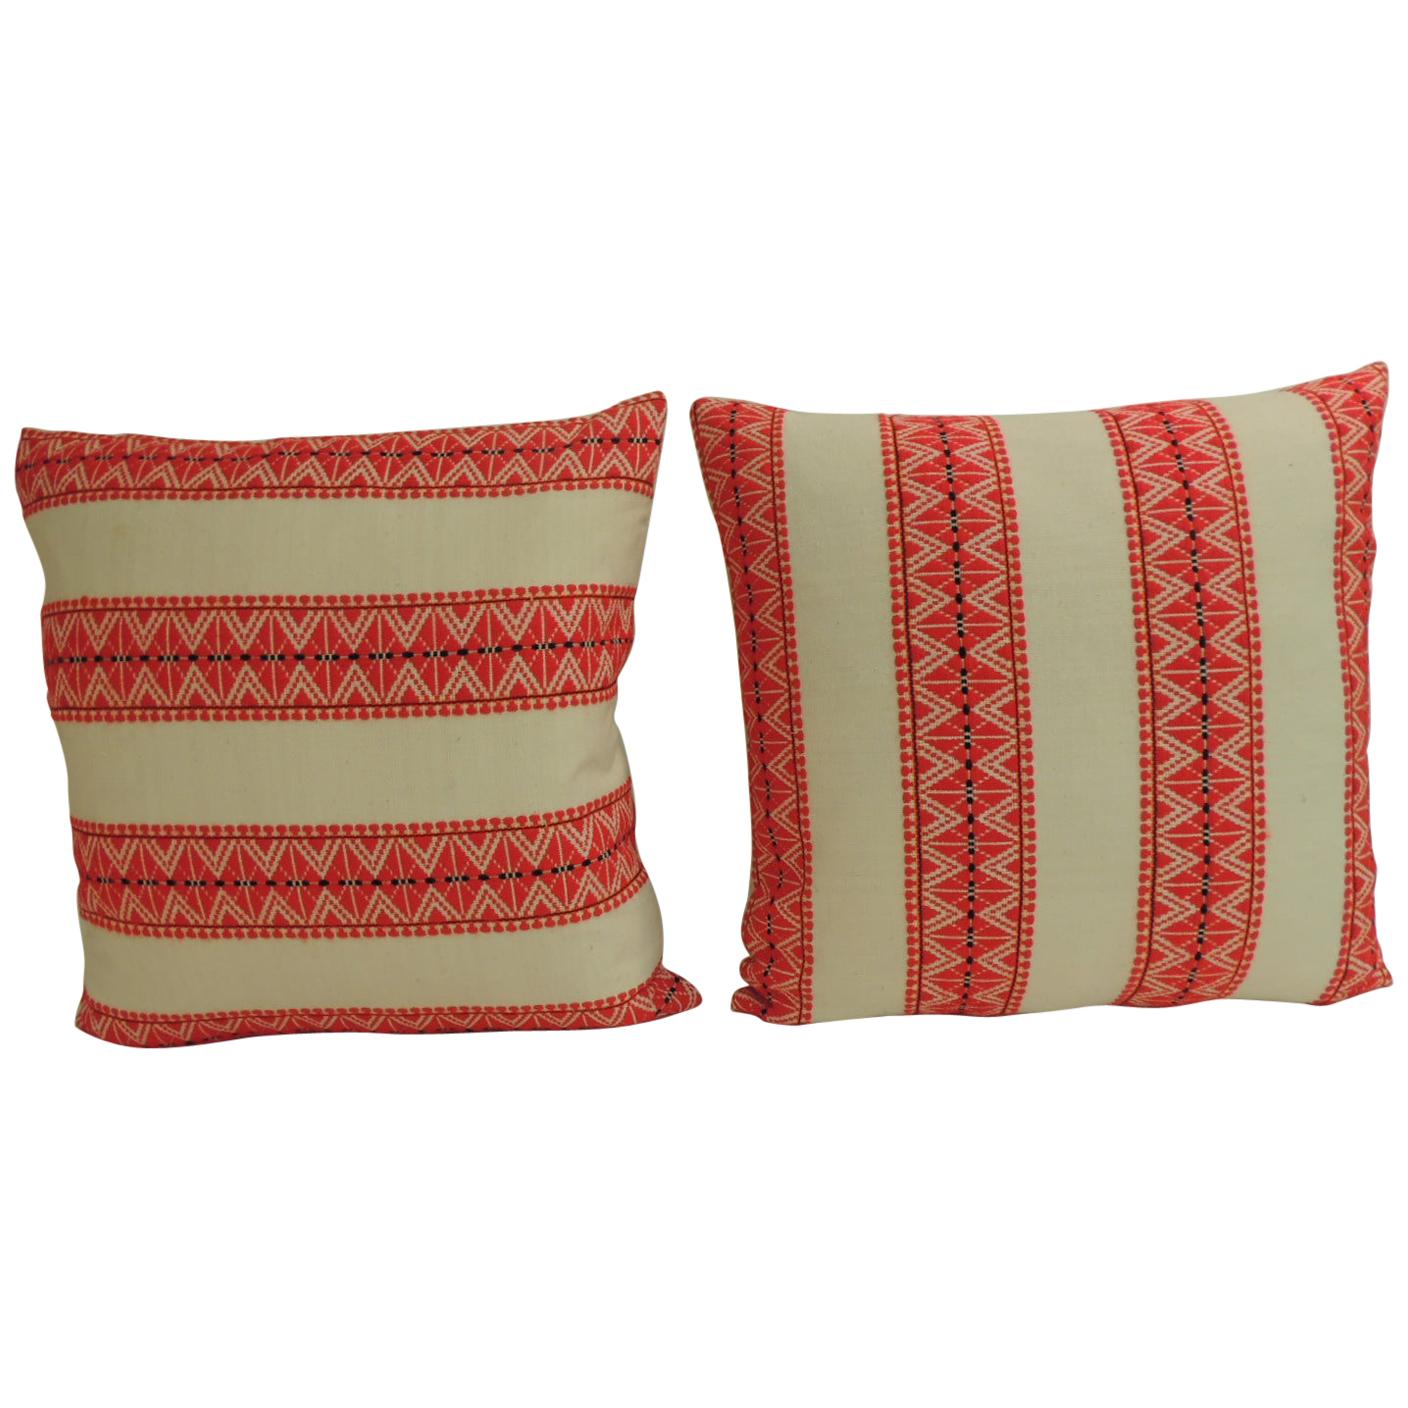 Pair of Vintage Bright Redish and Natural Woven Stripes Decorative Pillows